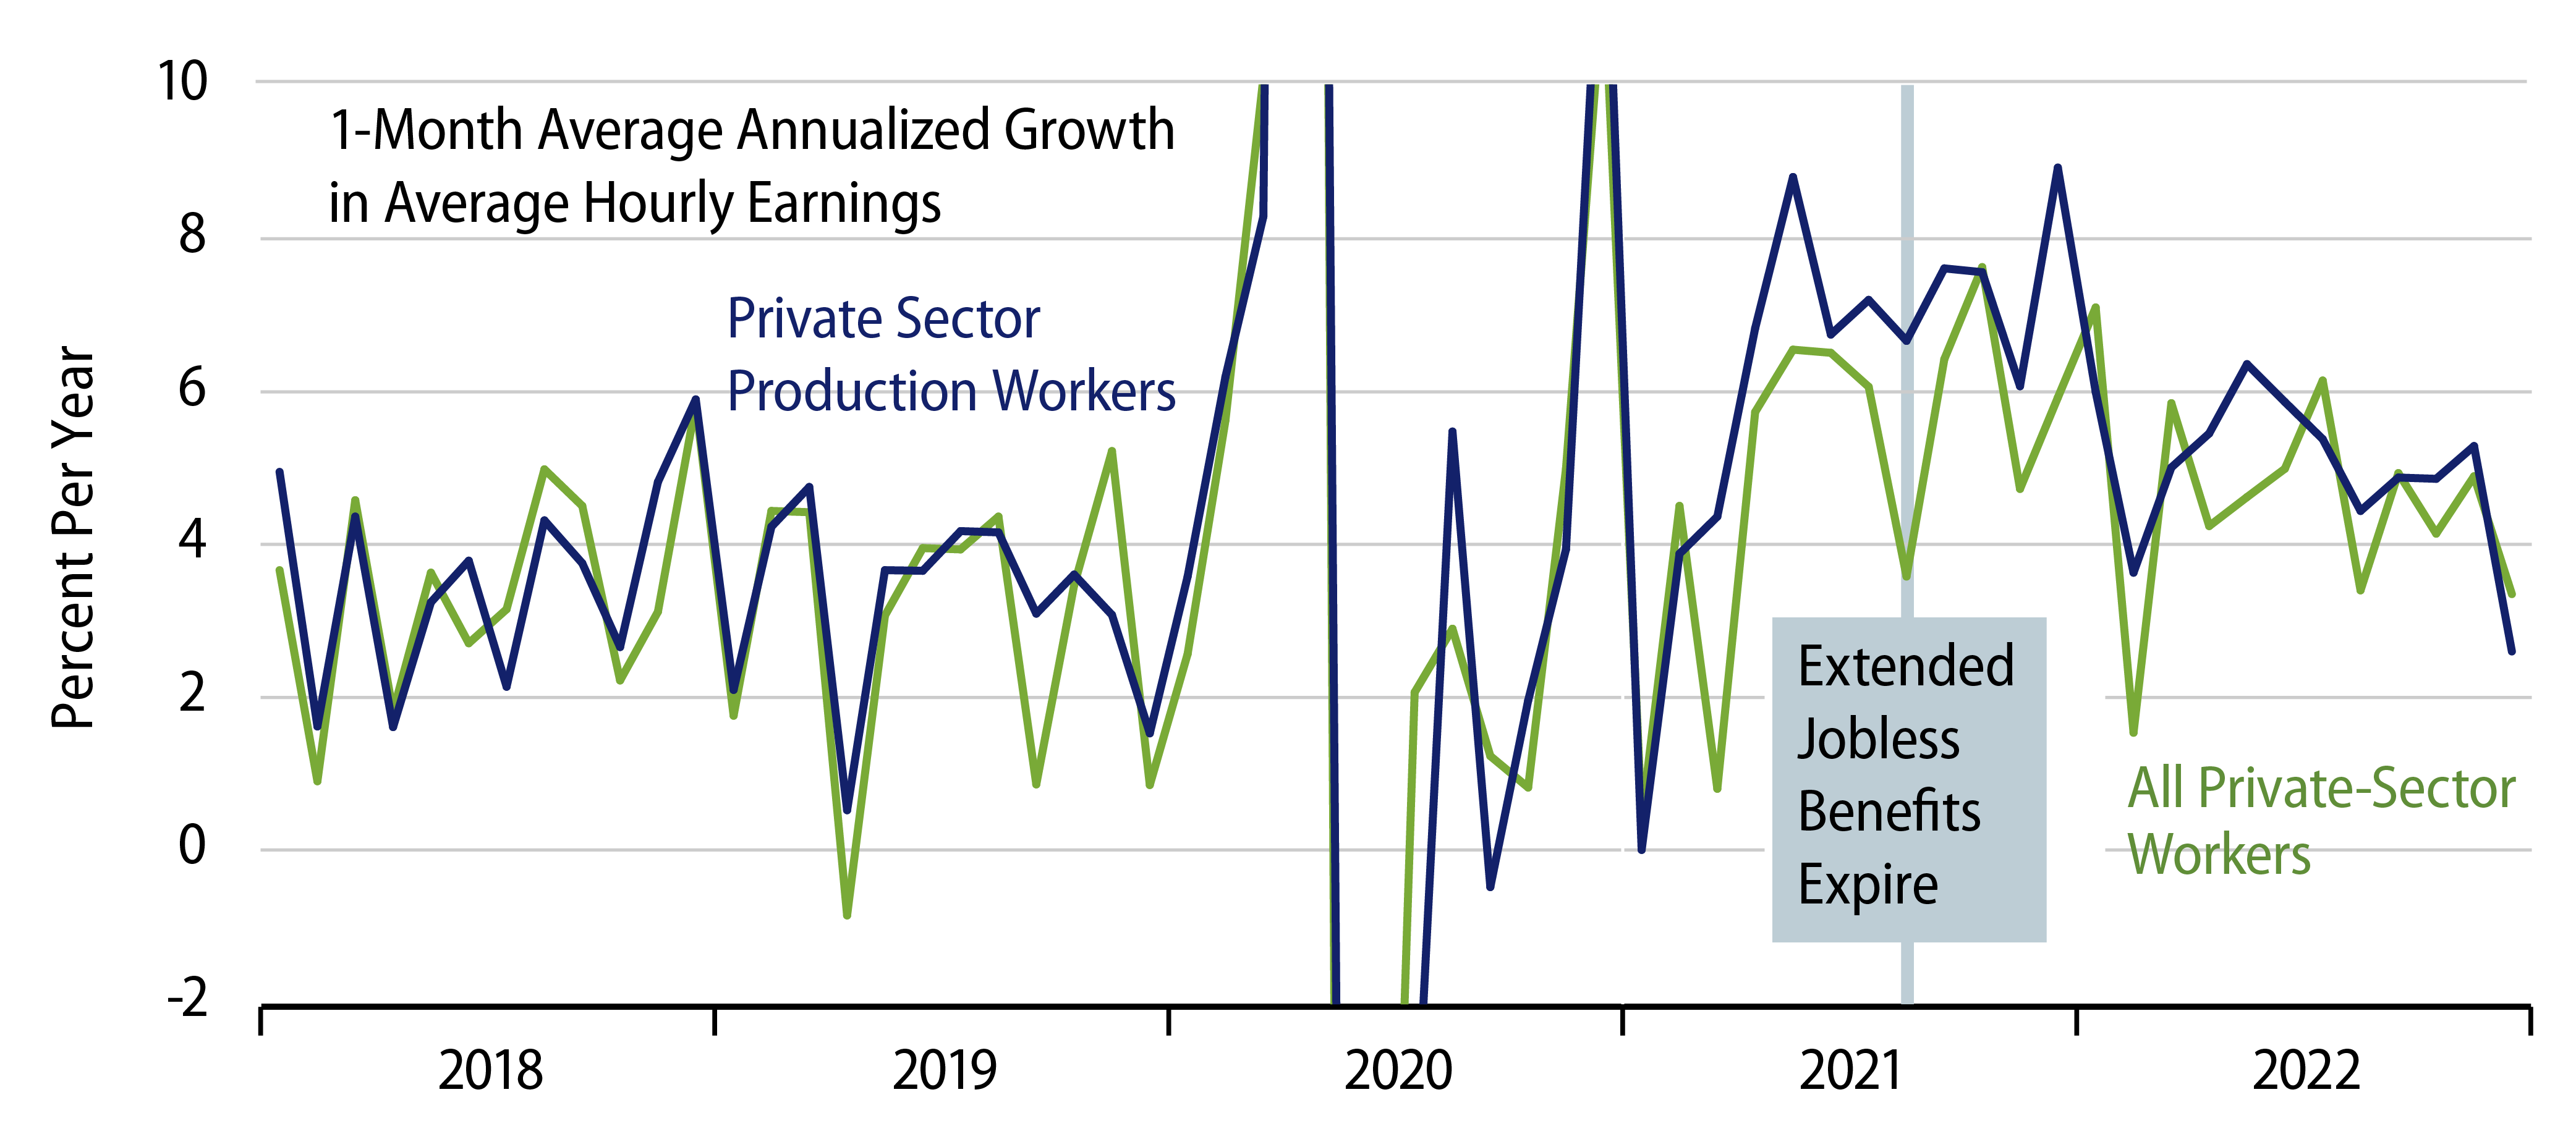 Explore Growth in Average Hourly Earnings